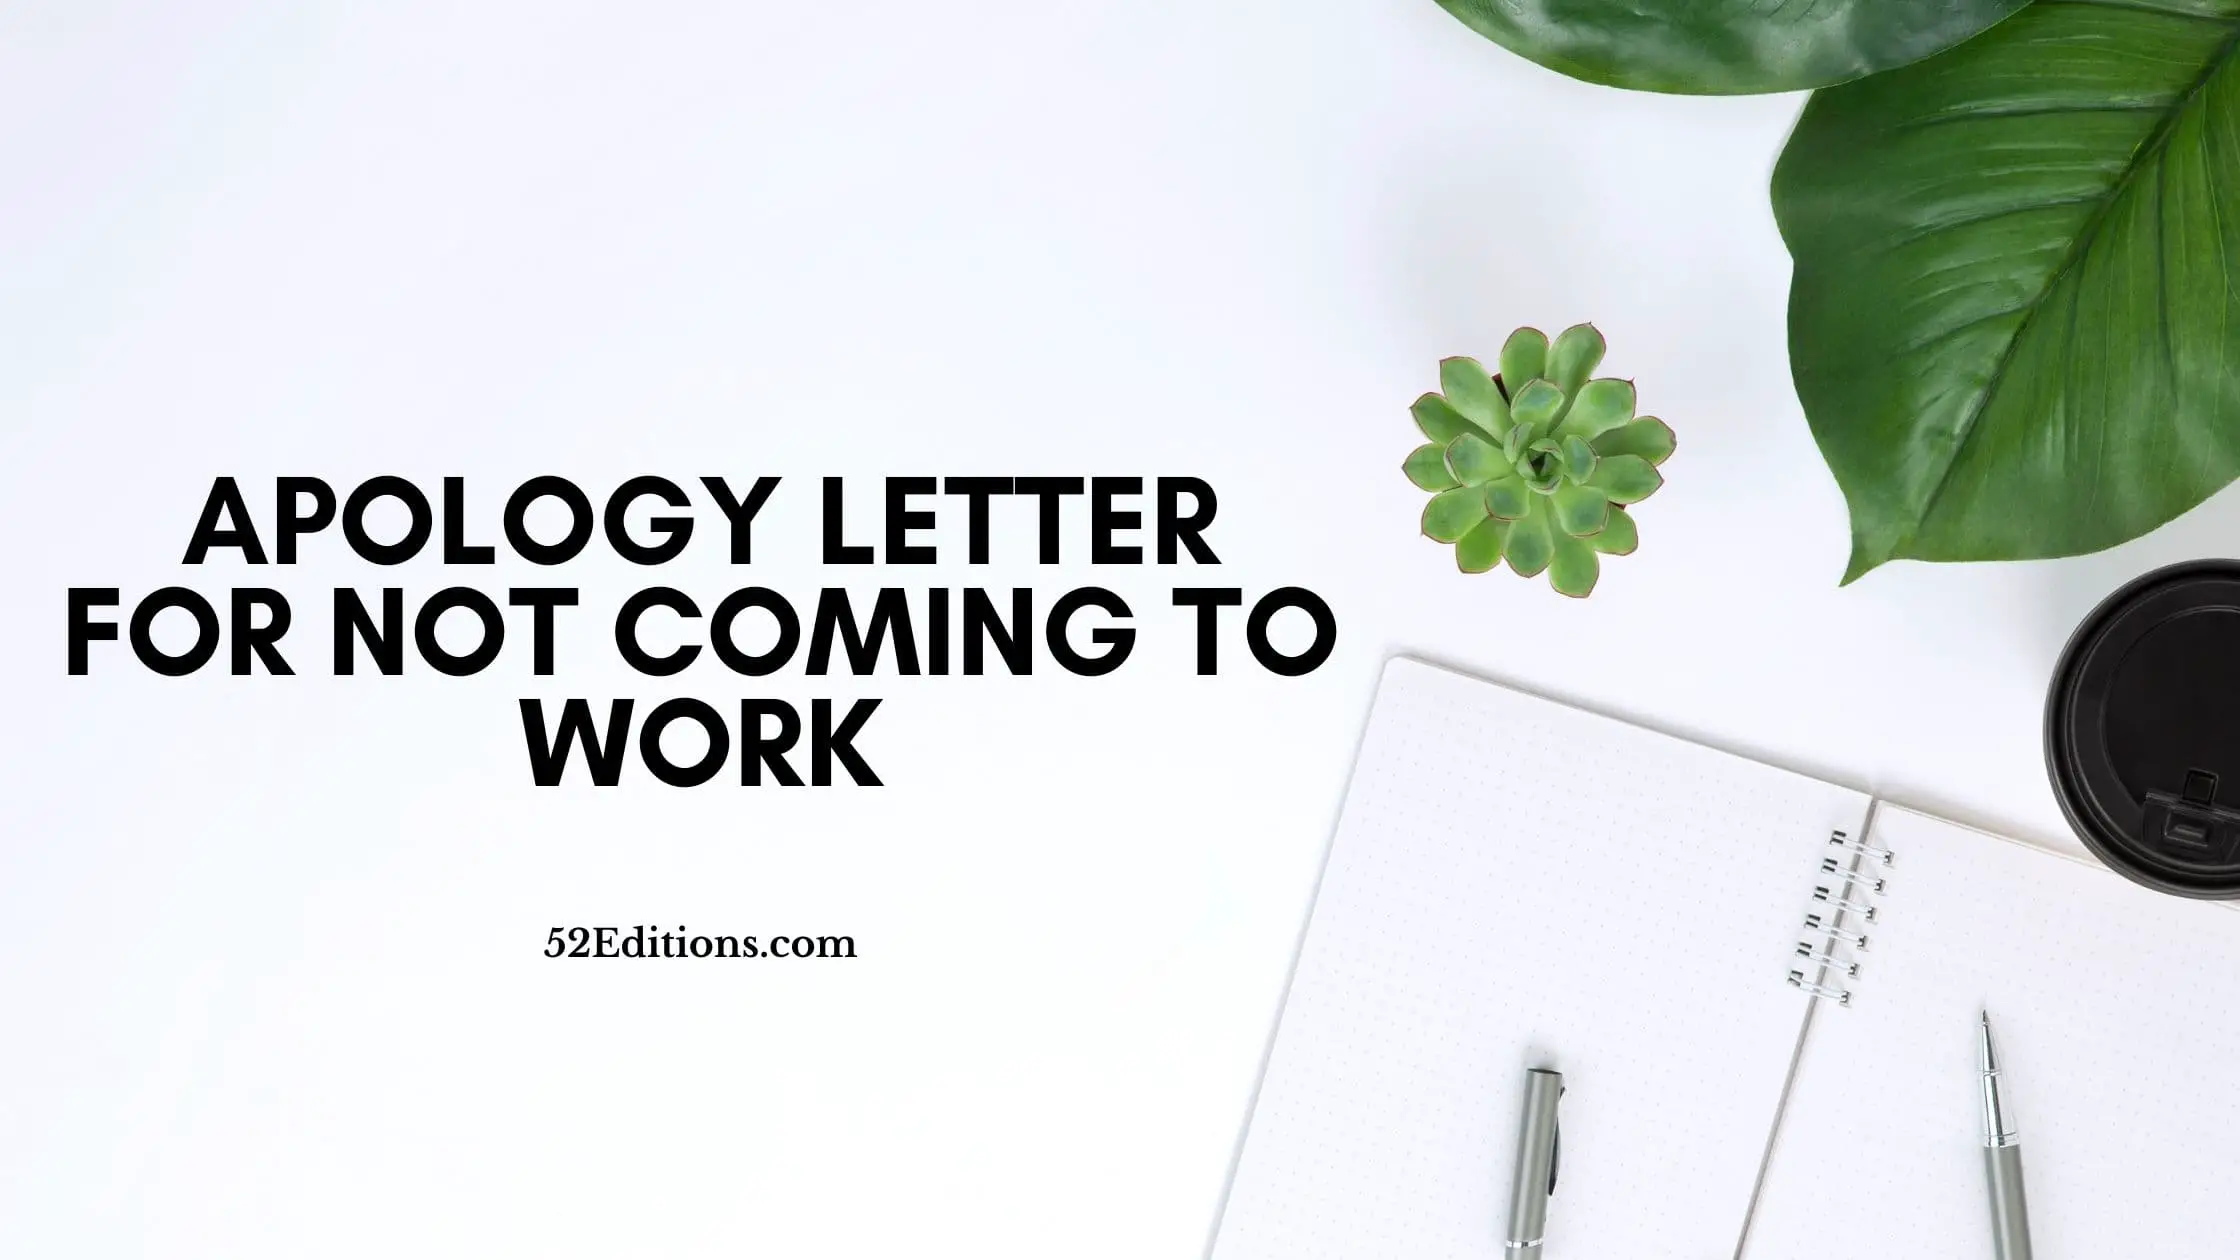 Apology Letter For Not Coming To Work // FREE Letter Templates